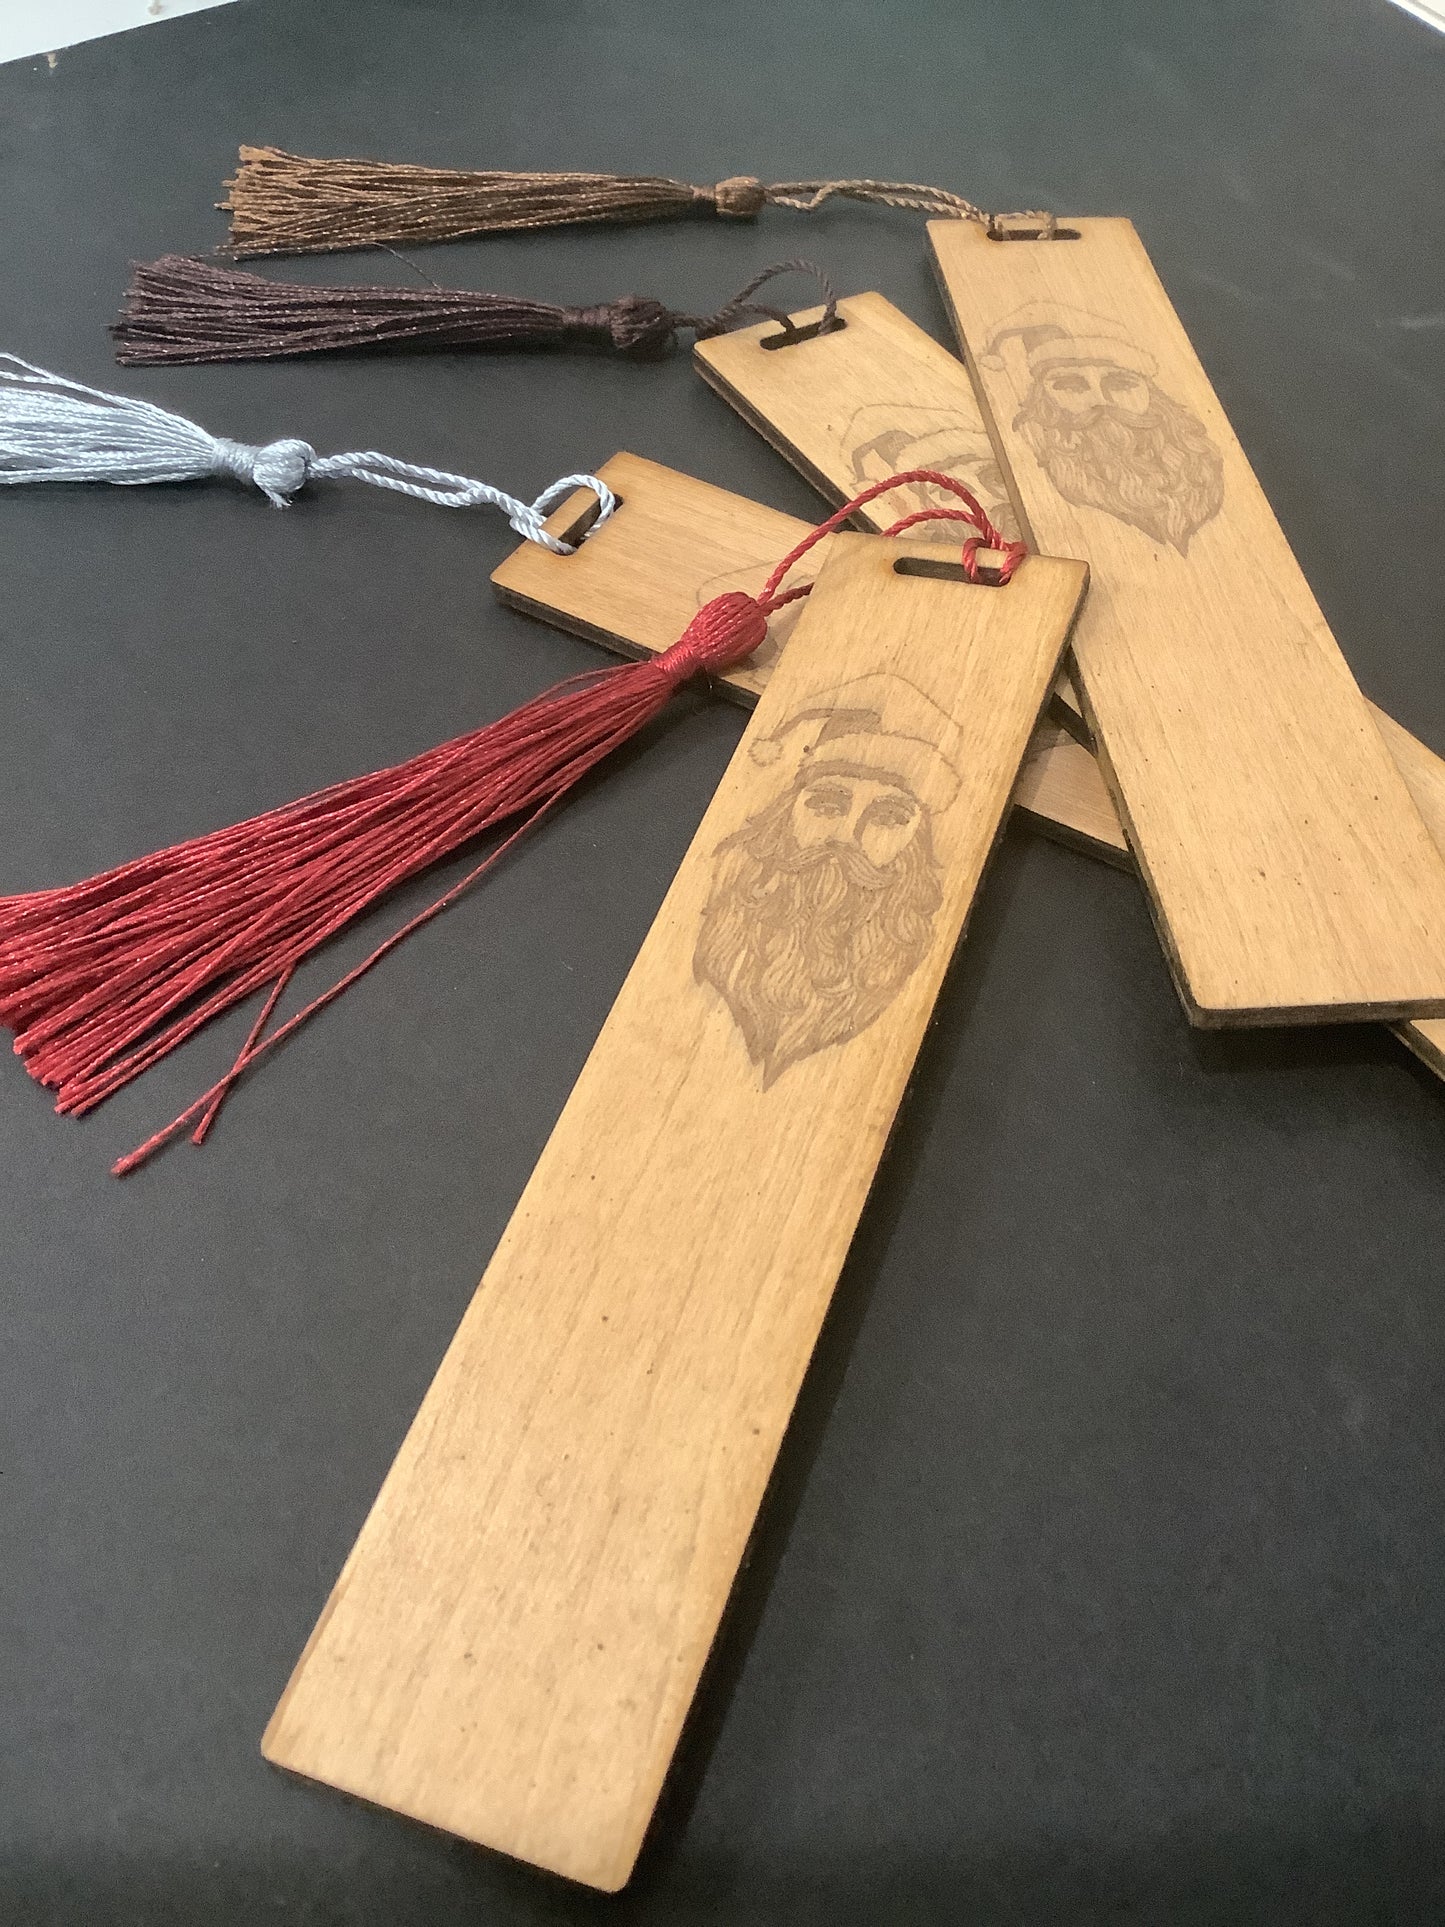 Wooden bookmarks by Carve Studio